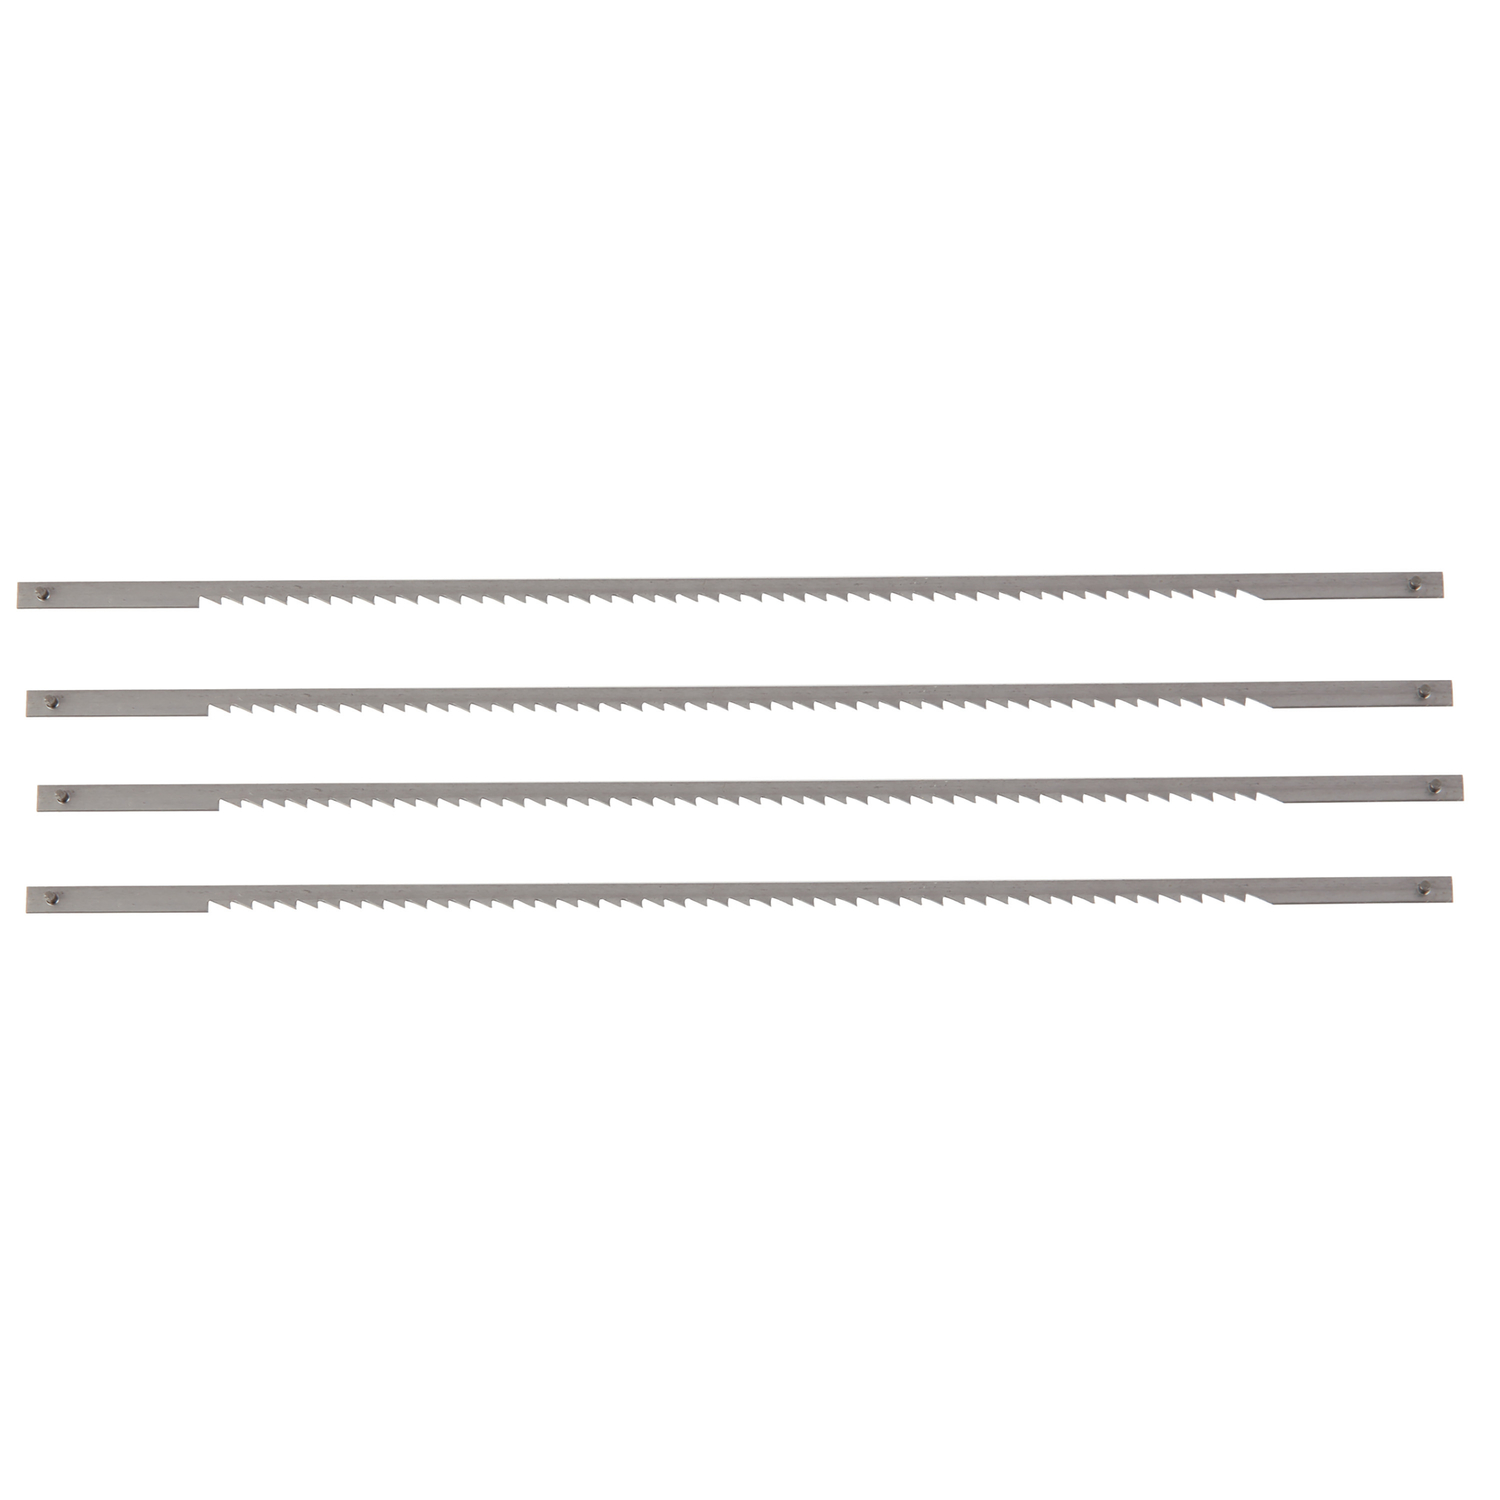 Stanley 6-1/2 in. Steel Coping Saw Blade 10 TPI 4 pk